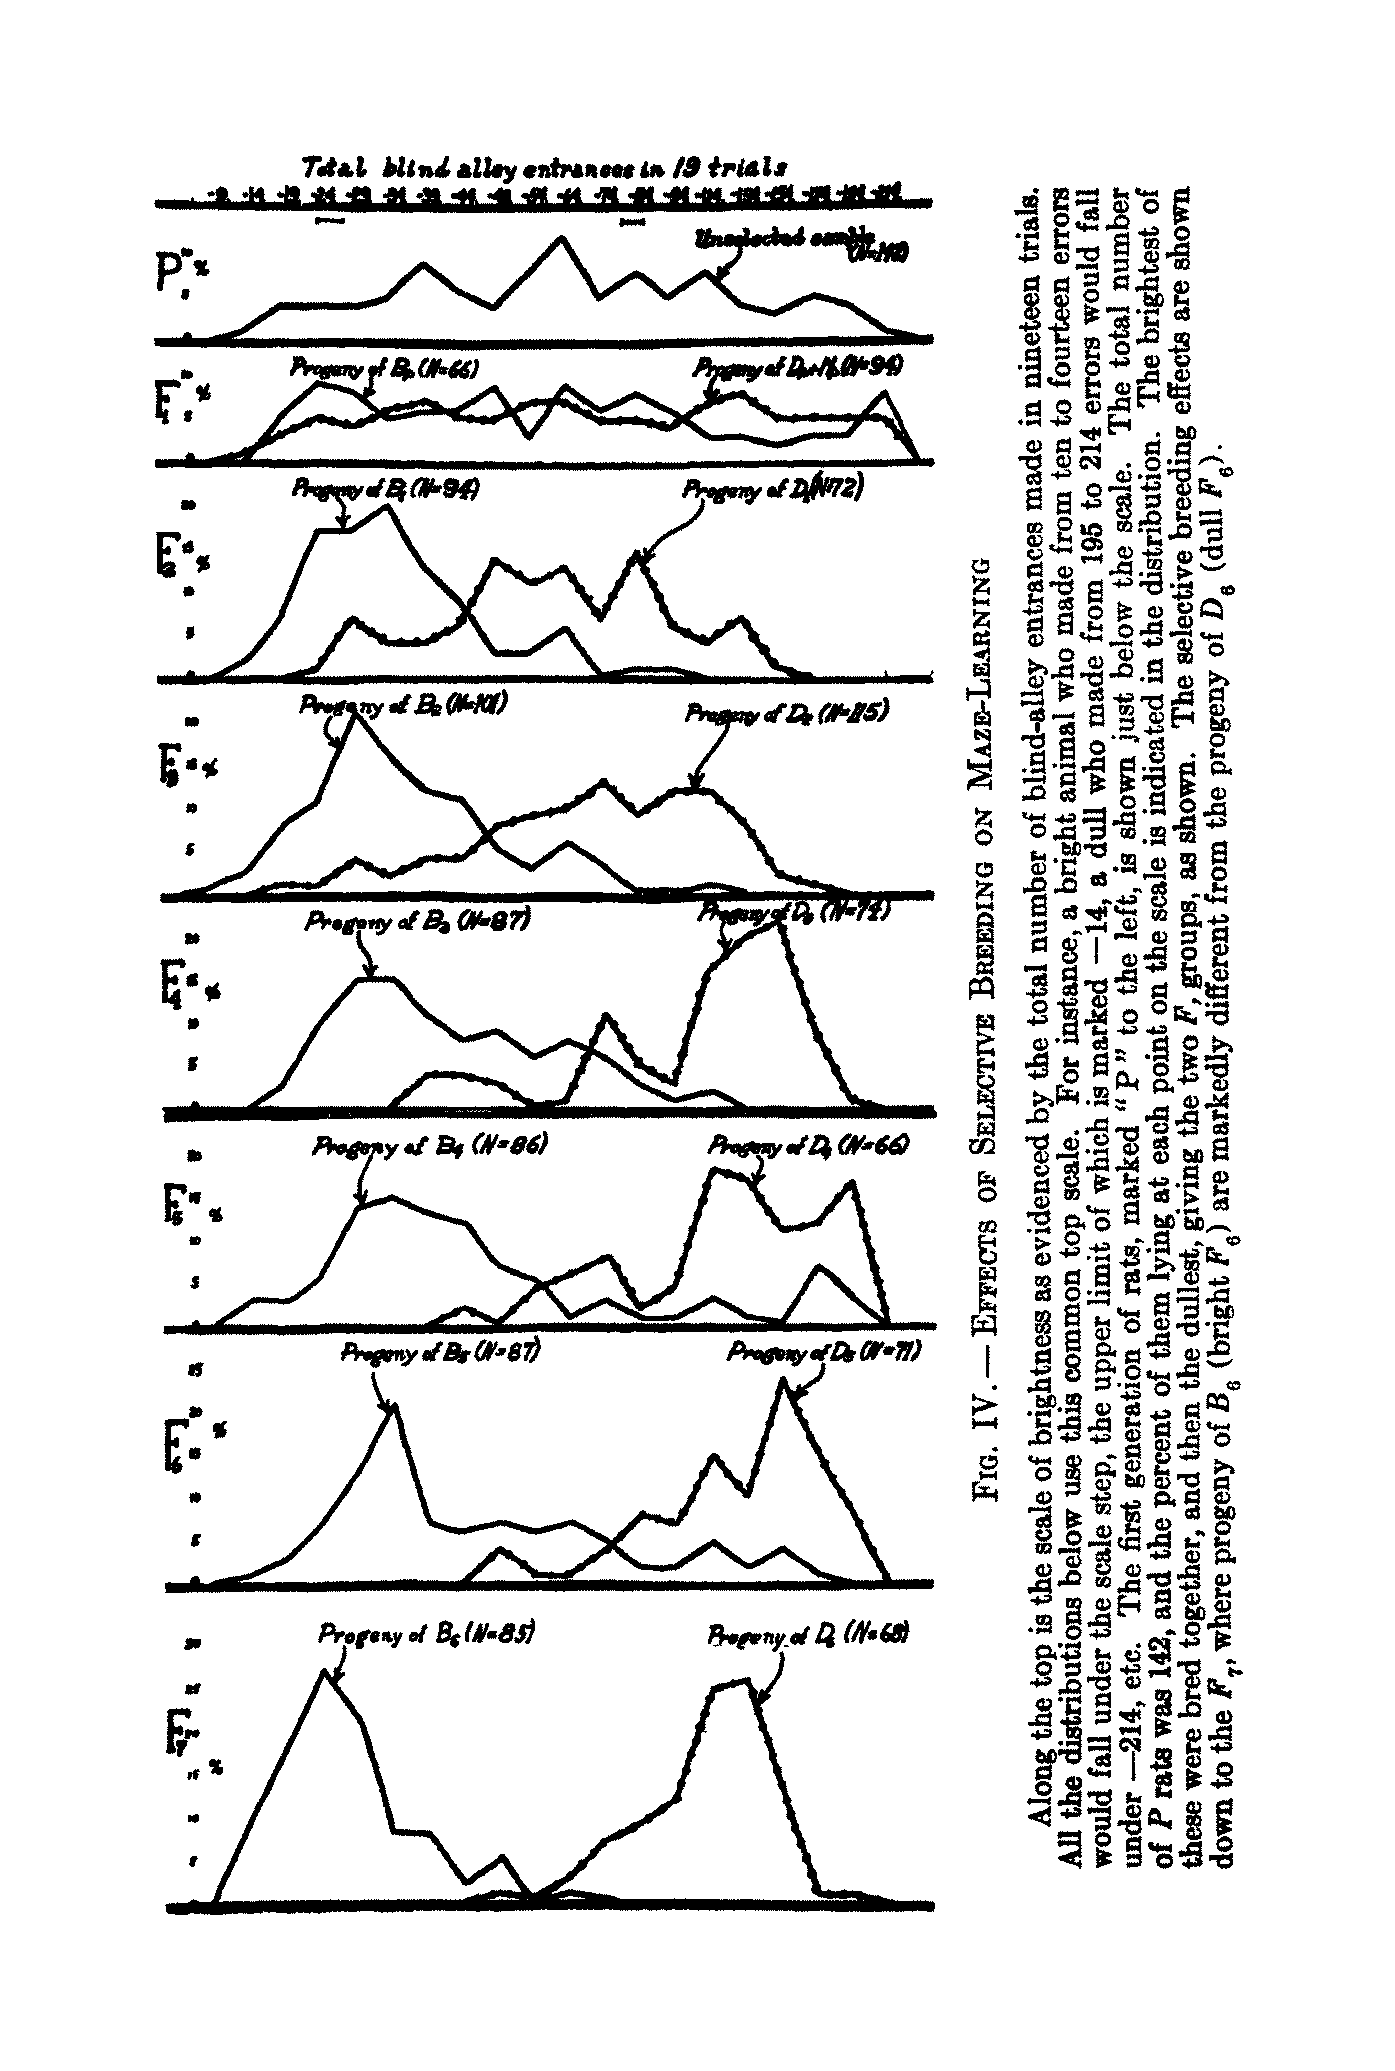 Figure 4 from Tryon1940 showing near-complete divergence after 7 generations.